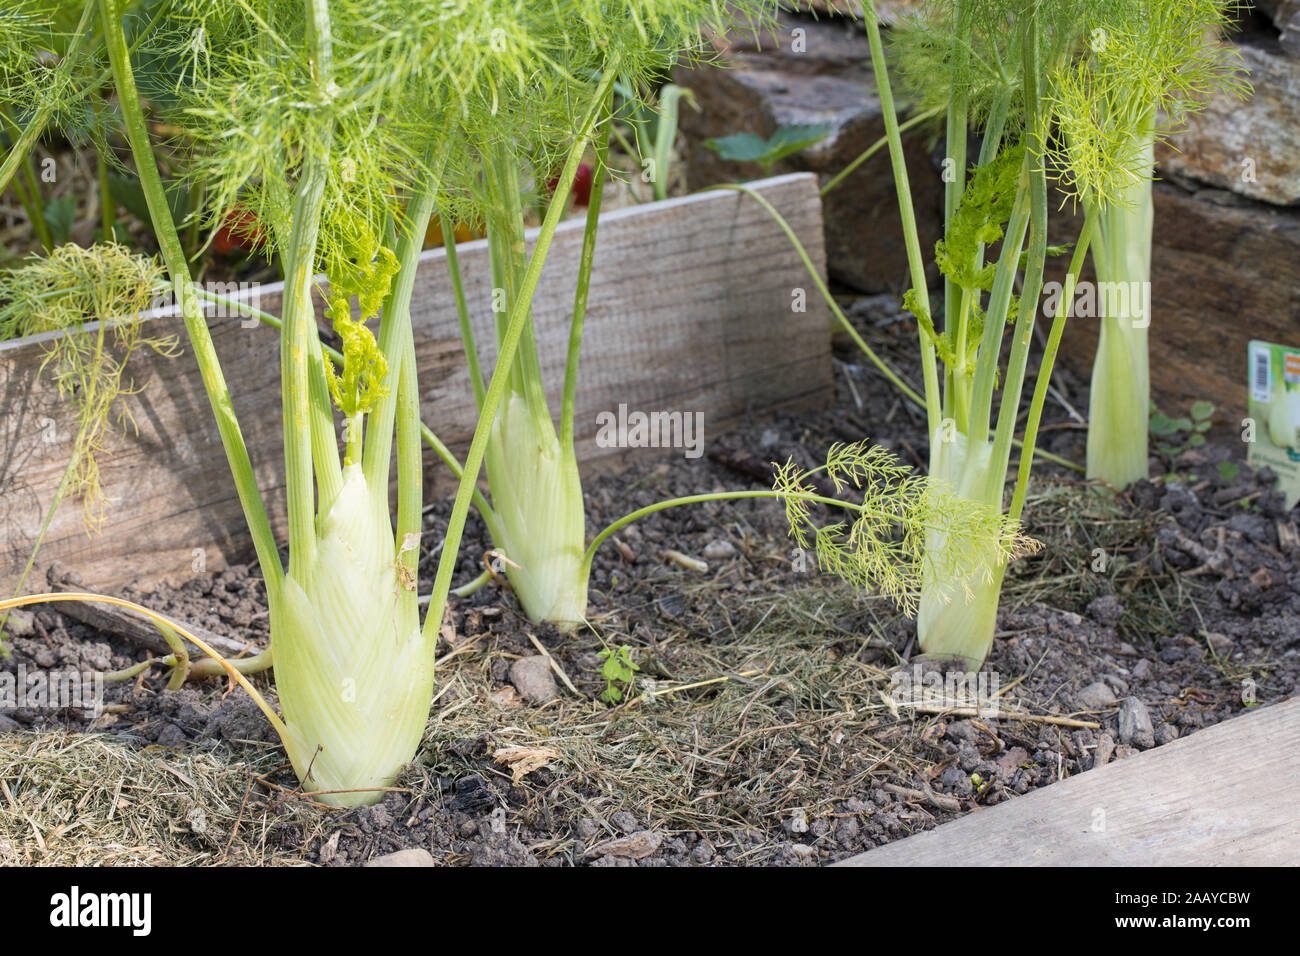 young and ripe fennel in our vegetable patch surounded by planks outside in the garden - little mulch of grass visible Stock Photo